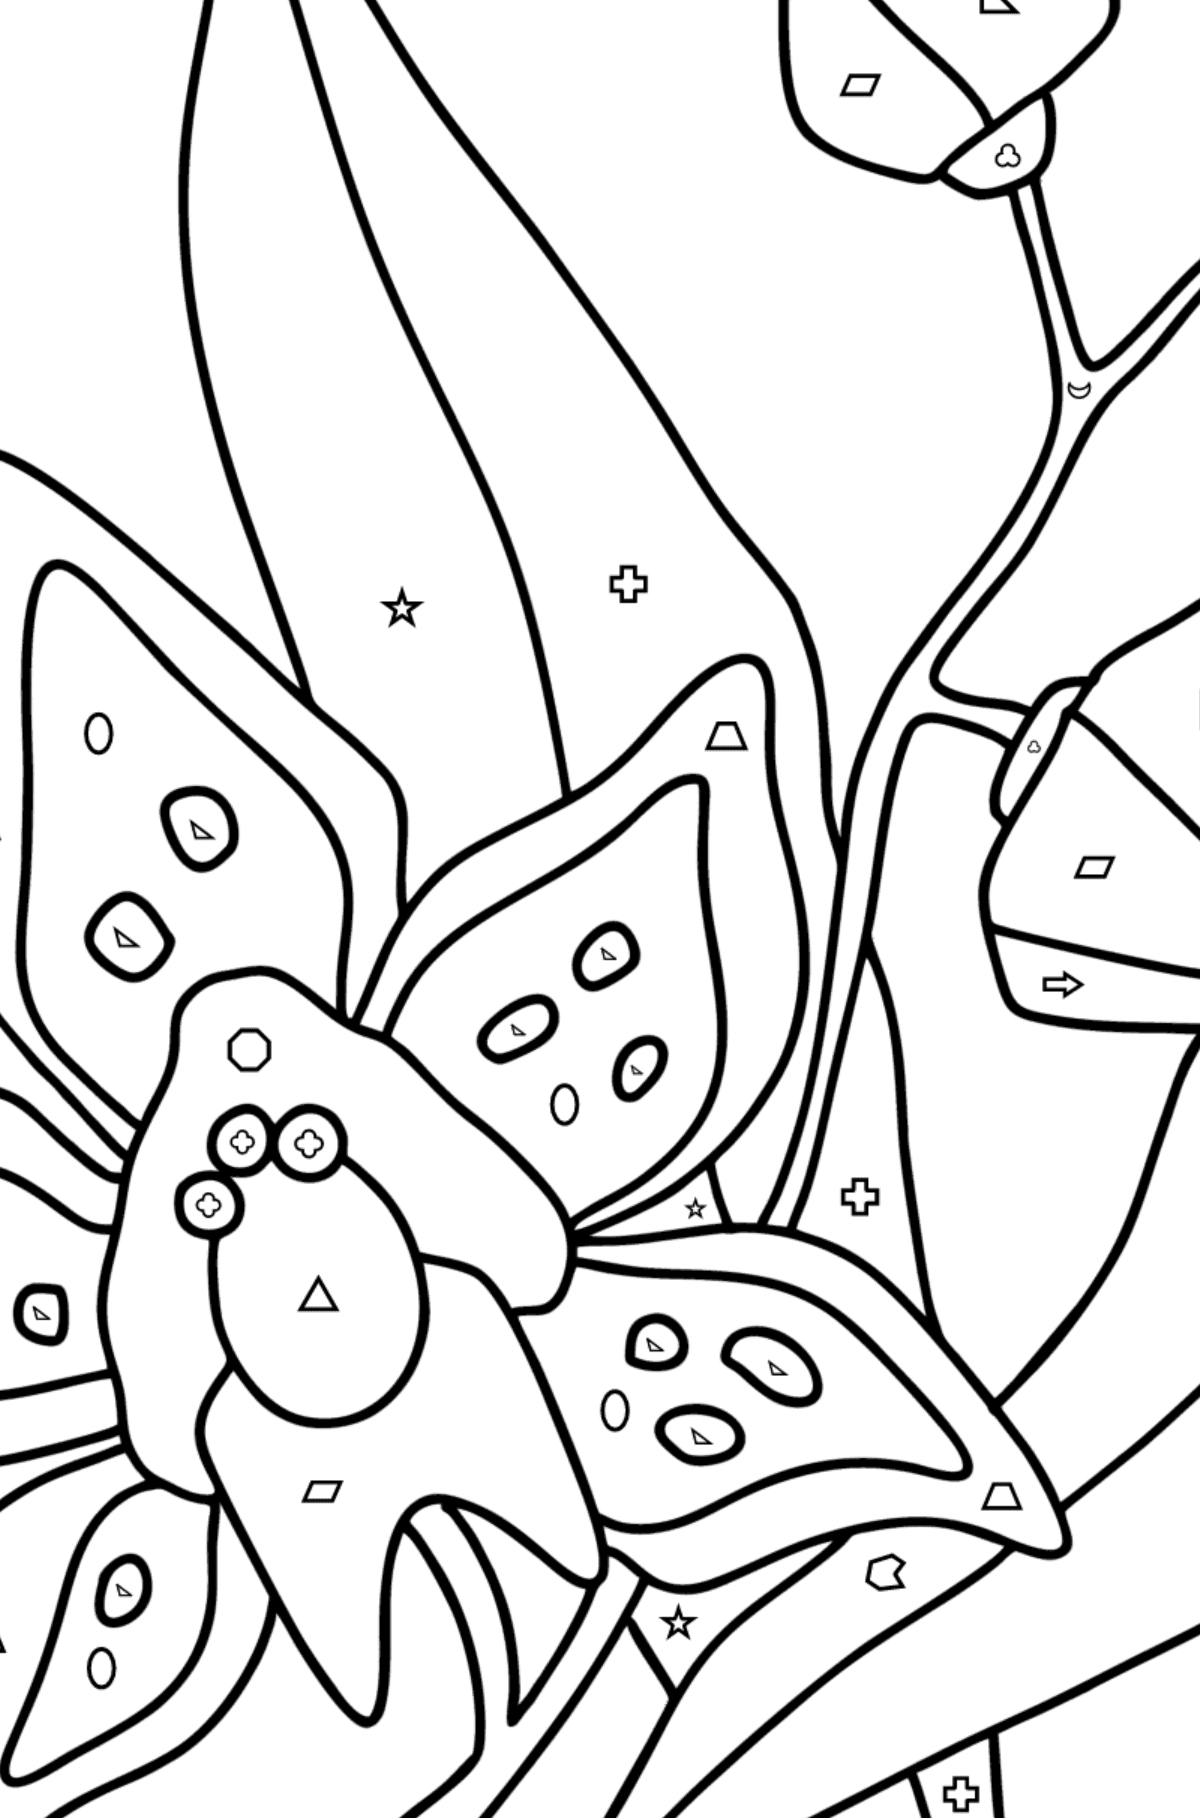 Orchid coloring page - Coloring by Geometric Shapes for Kids